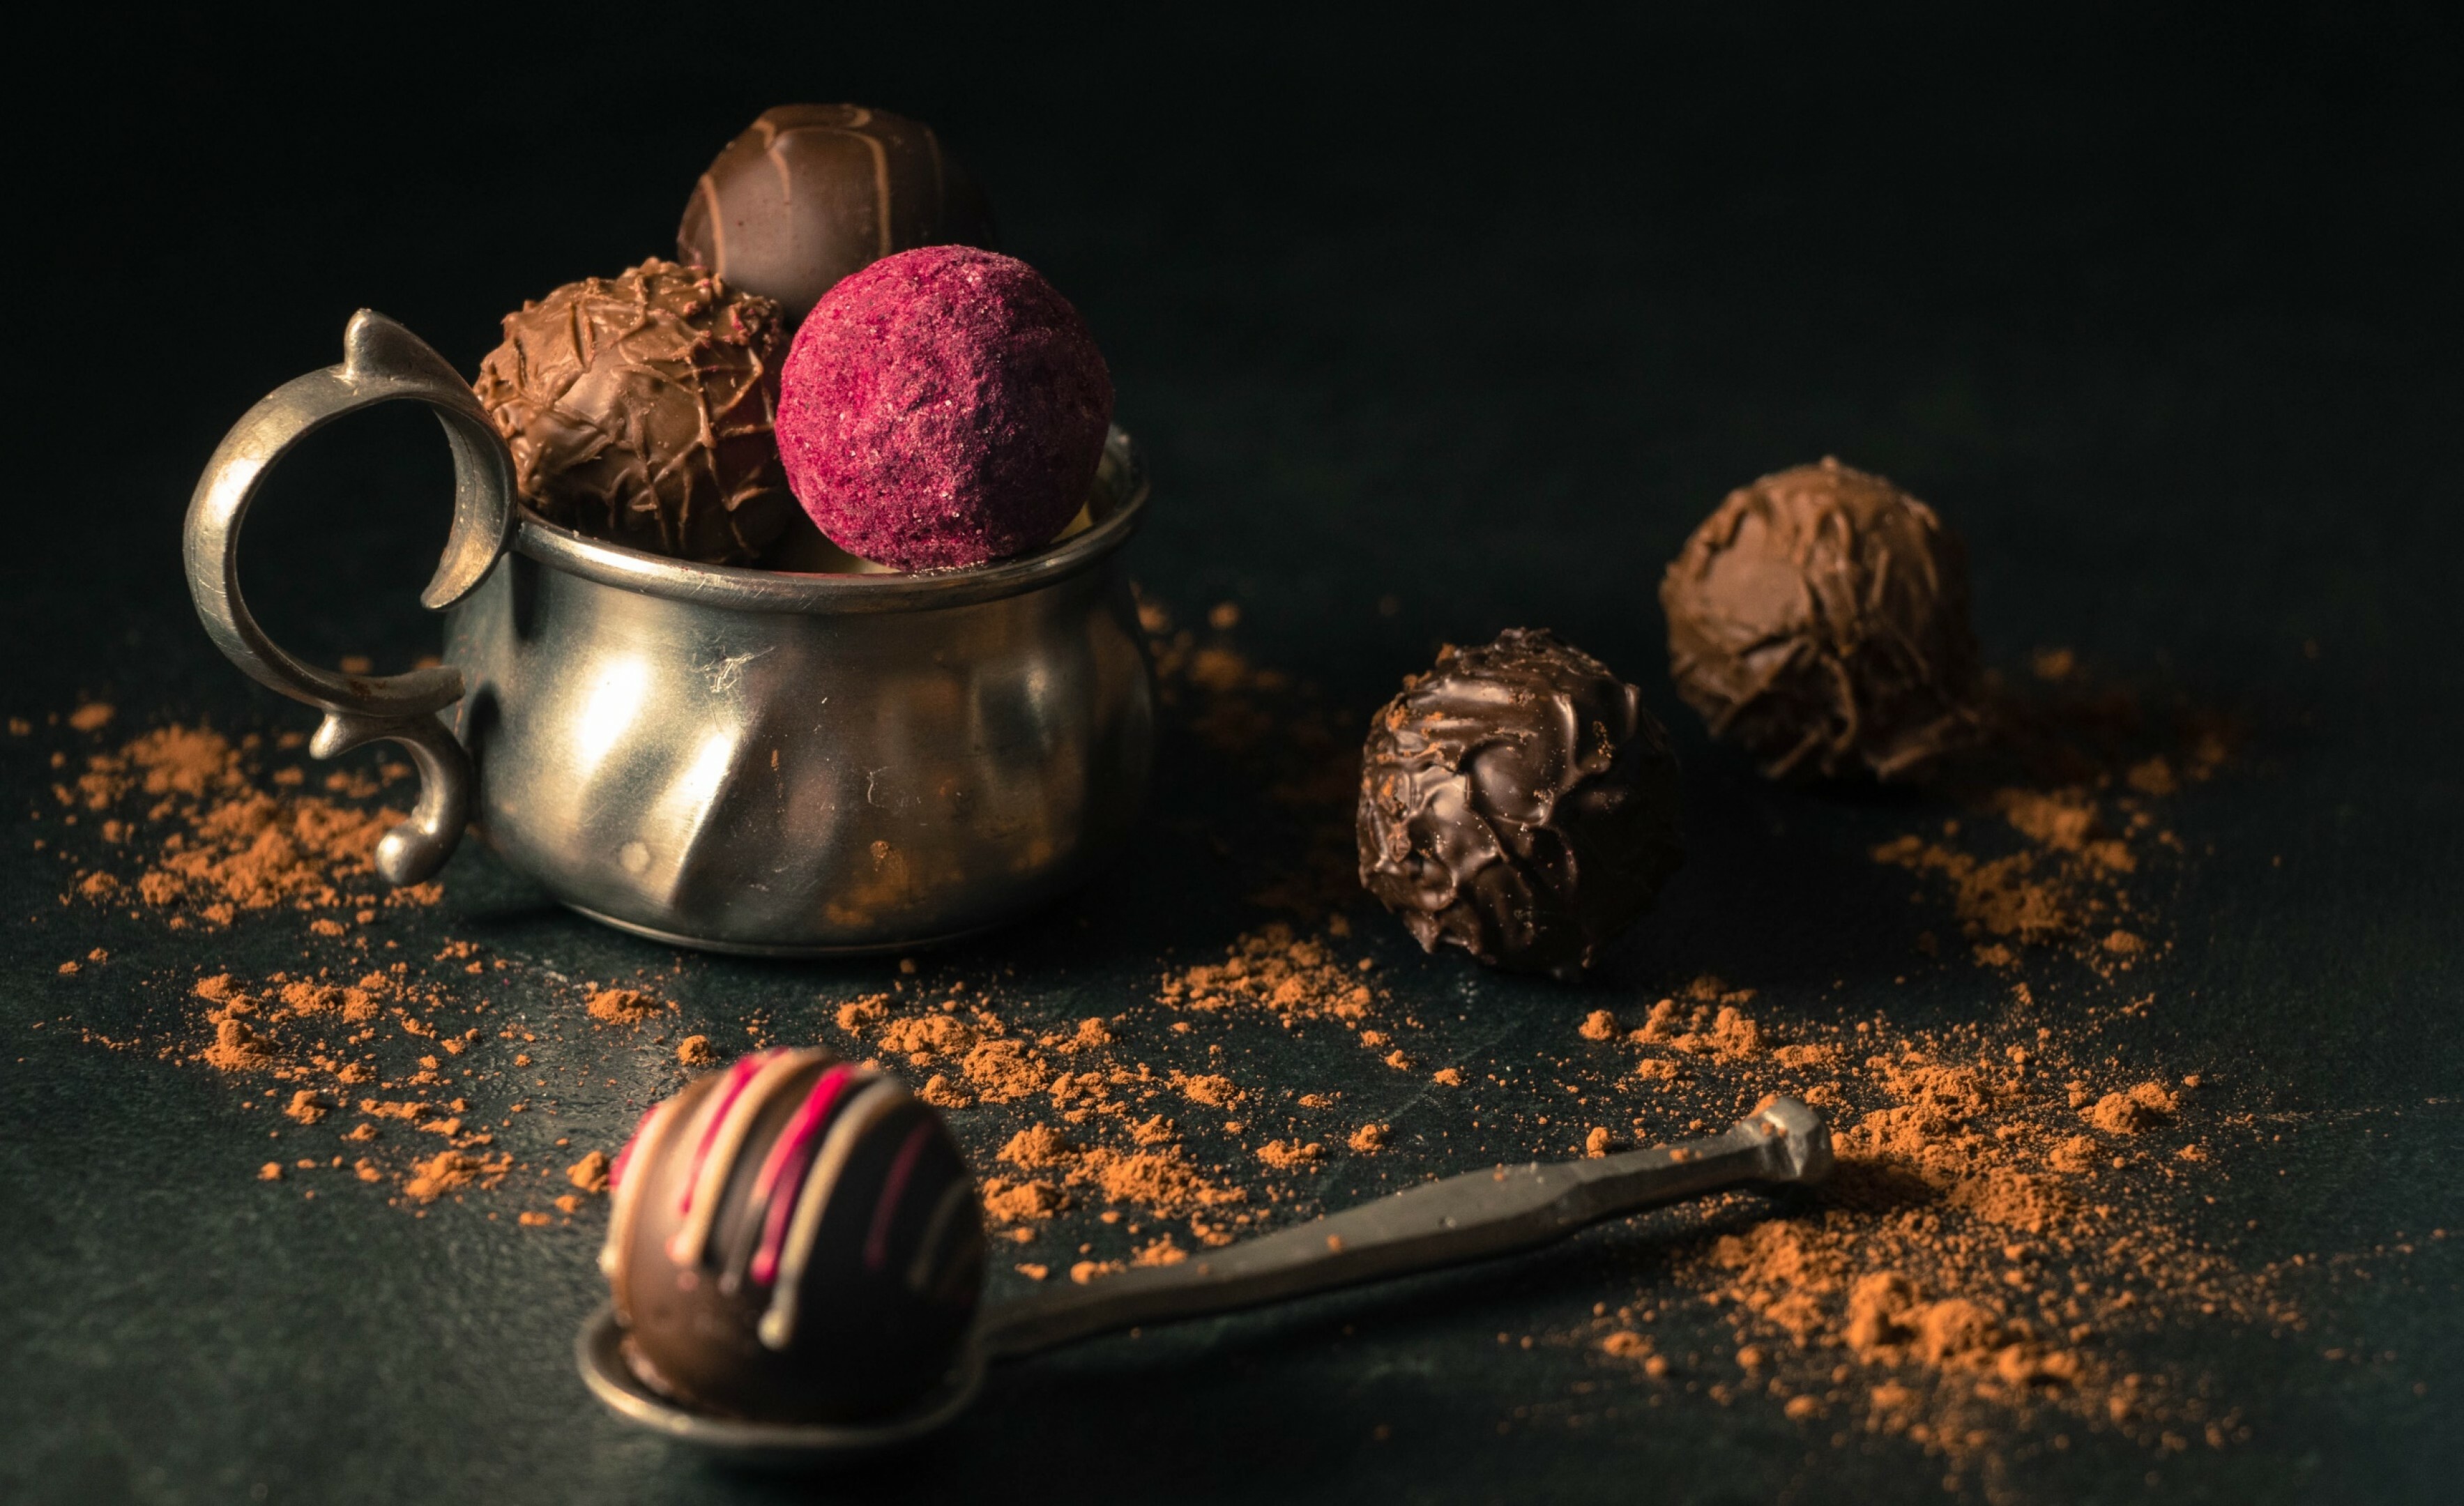 Sweets: Bonbon, A small ball coated in chocolate. 3540x2160 HD Background.